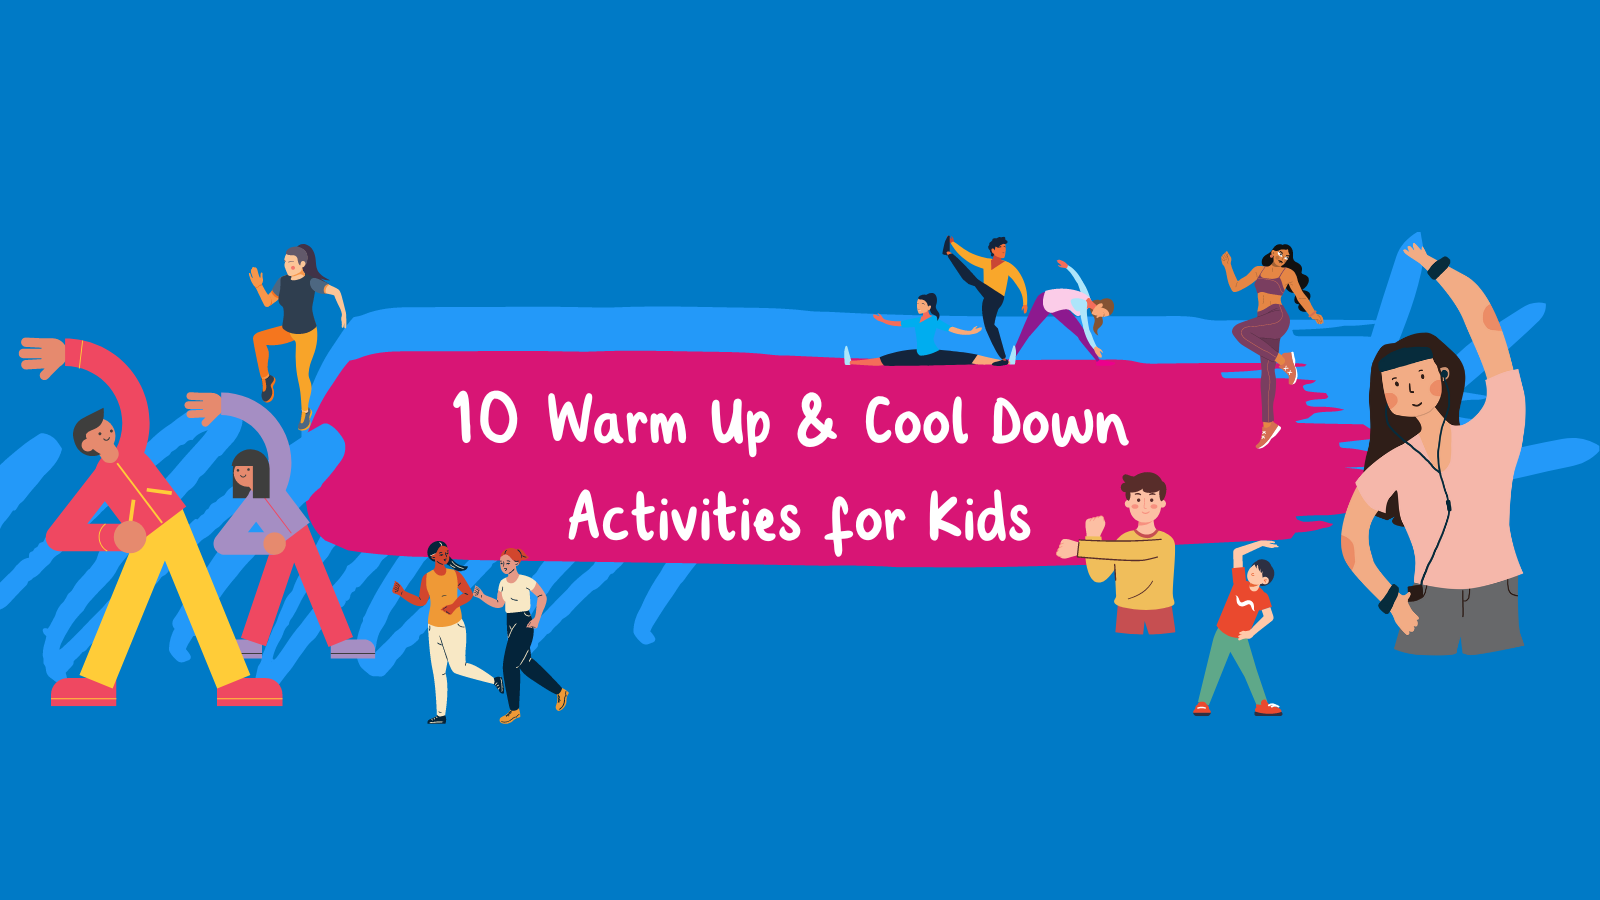 10 Warm Up & Cool Down Activities for Kids - Twinkl